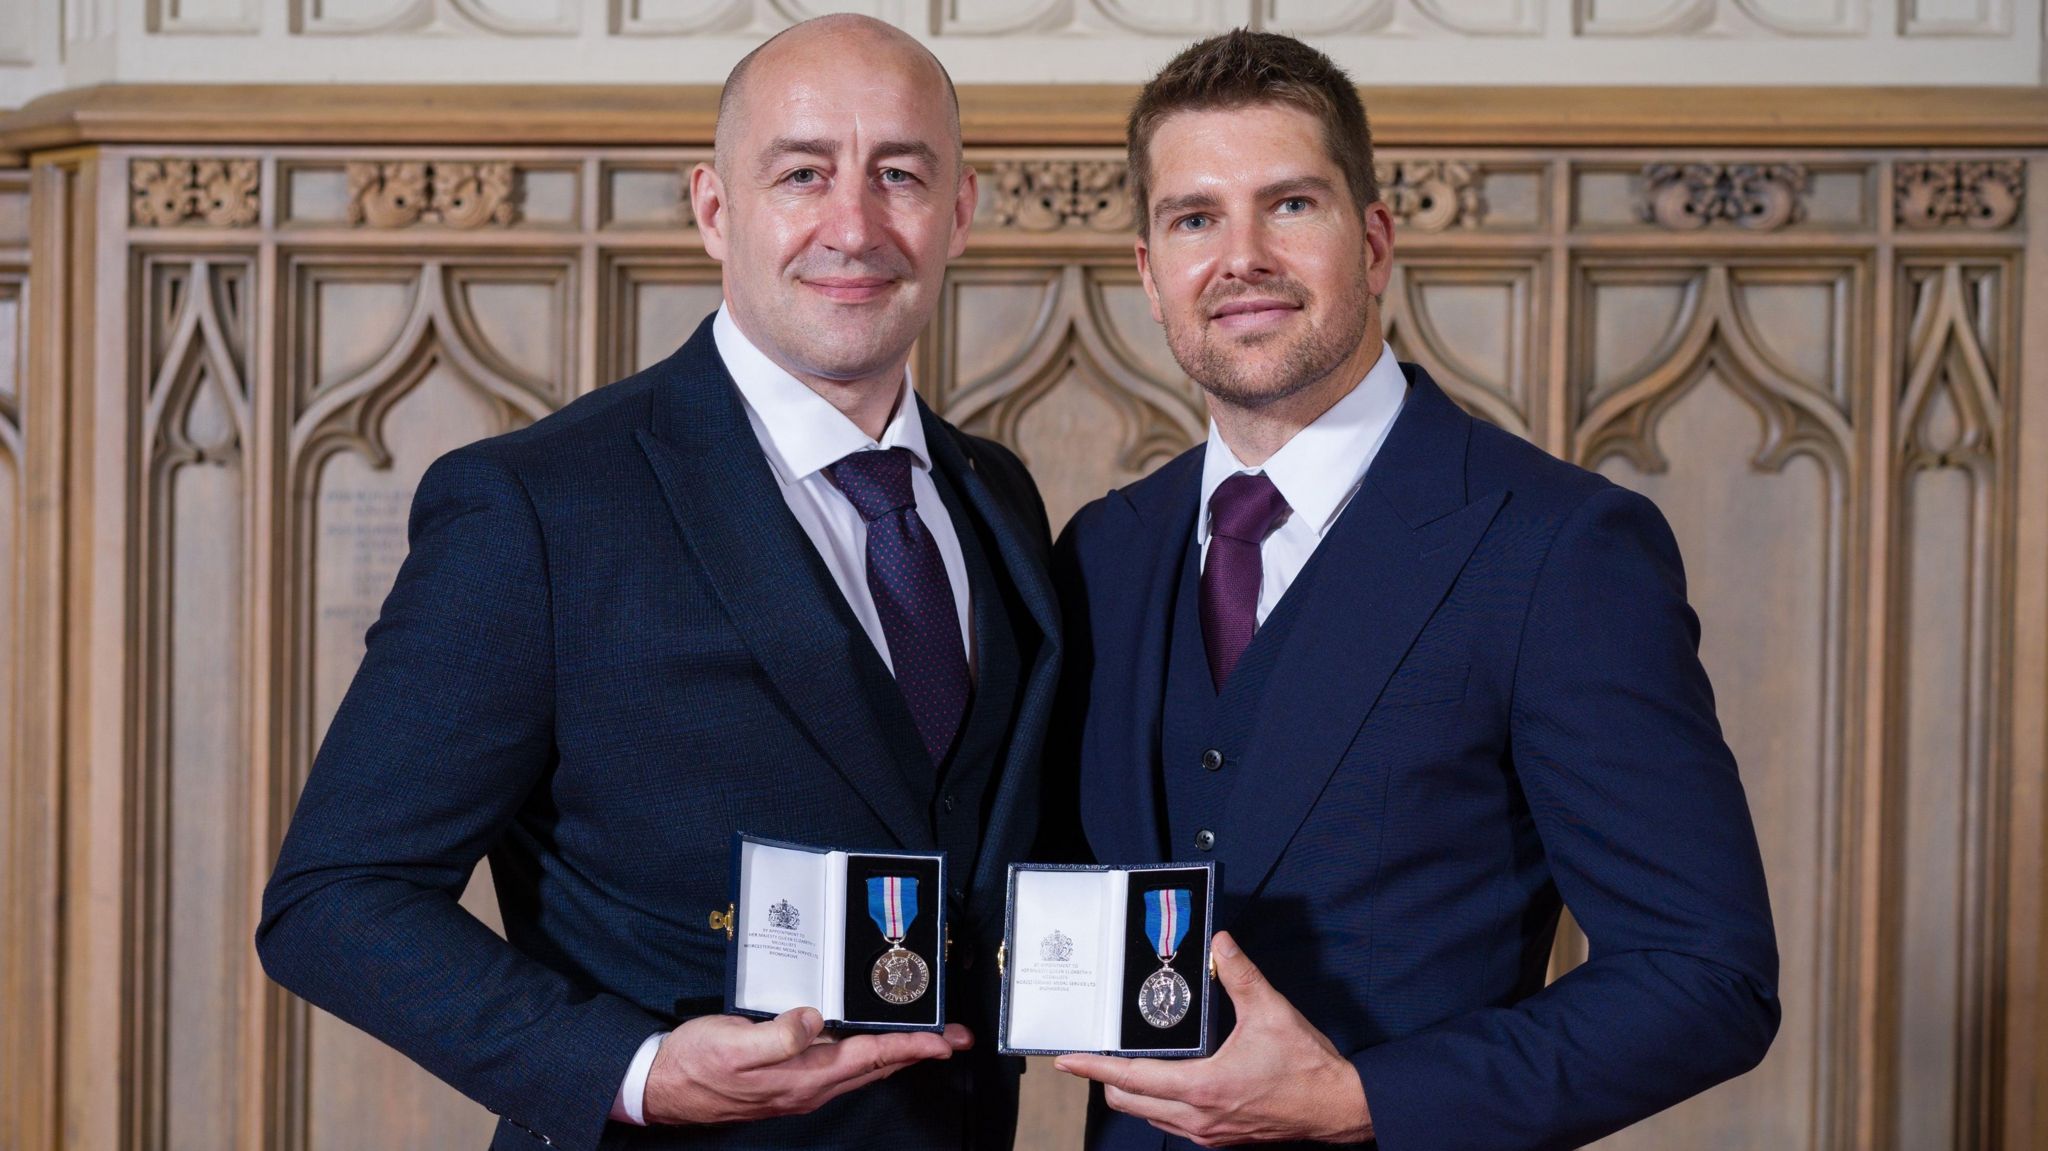 Steve Gallant (l) and Darryn Frost (r) both wear dark blue suits and hold their identical medals in front of them